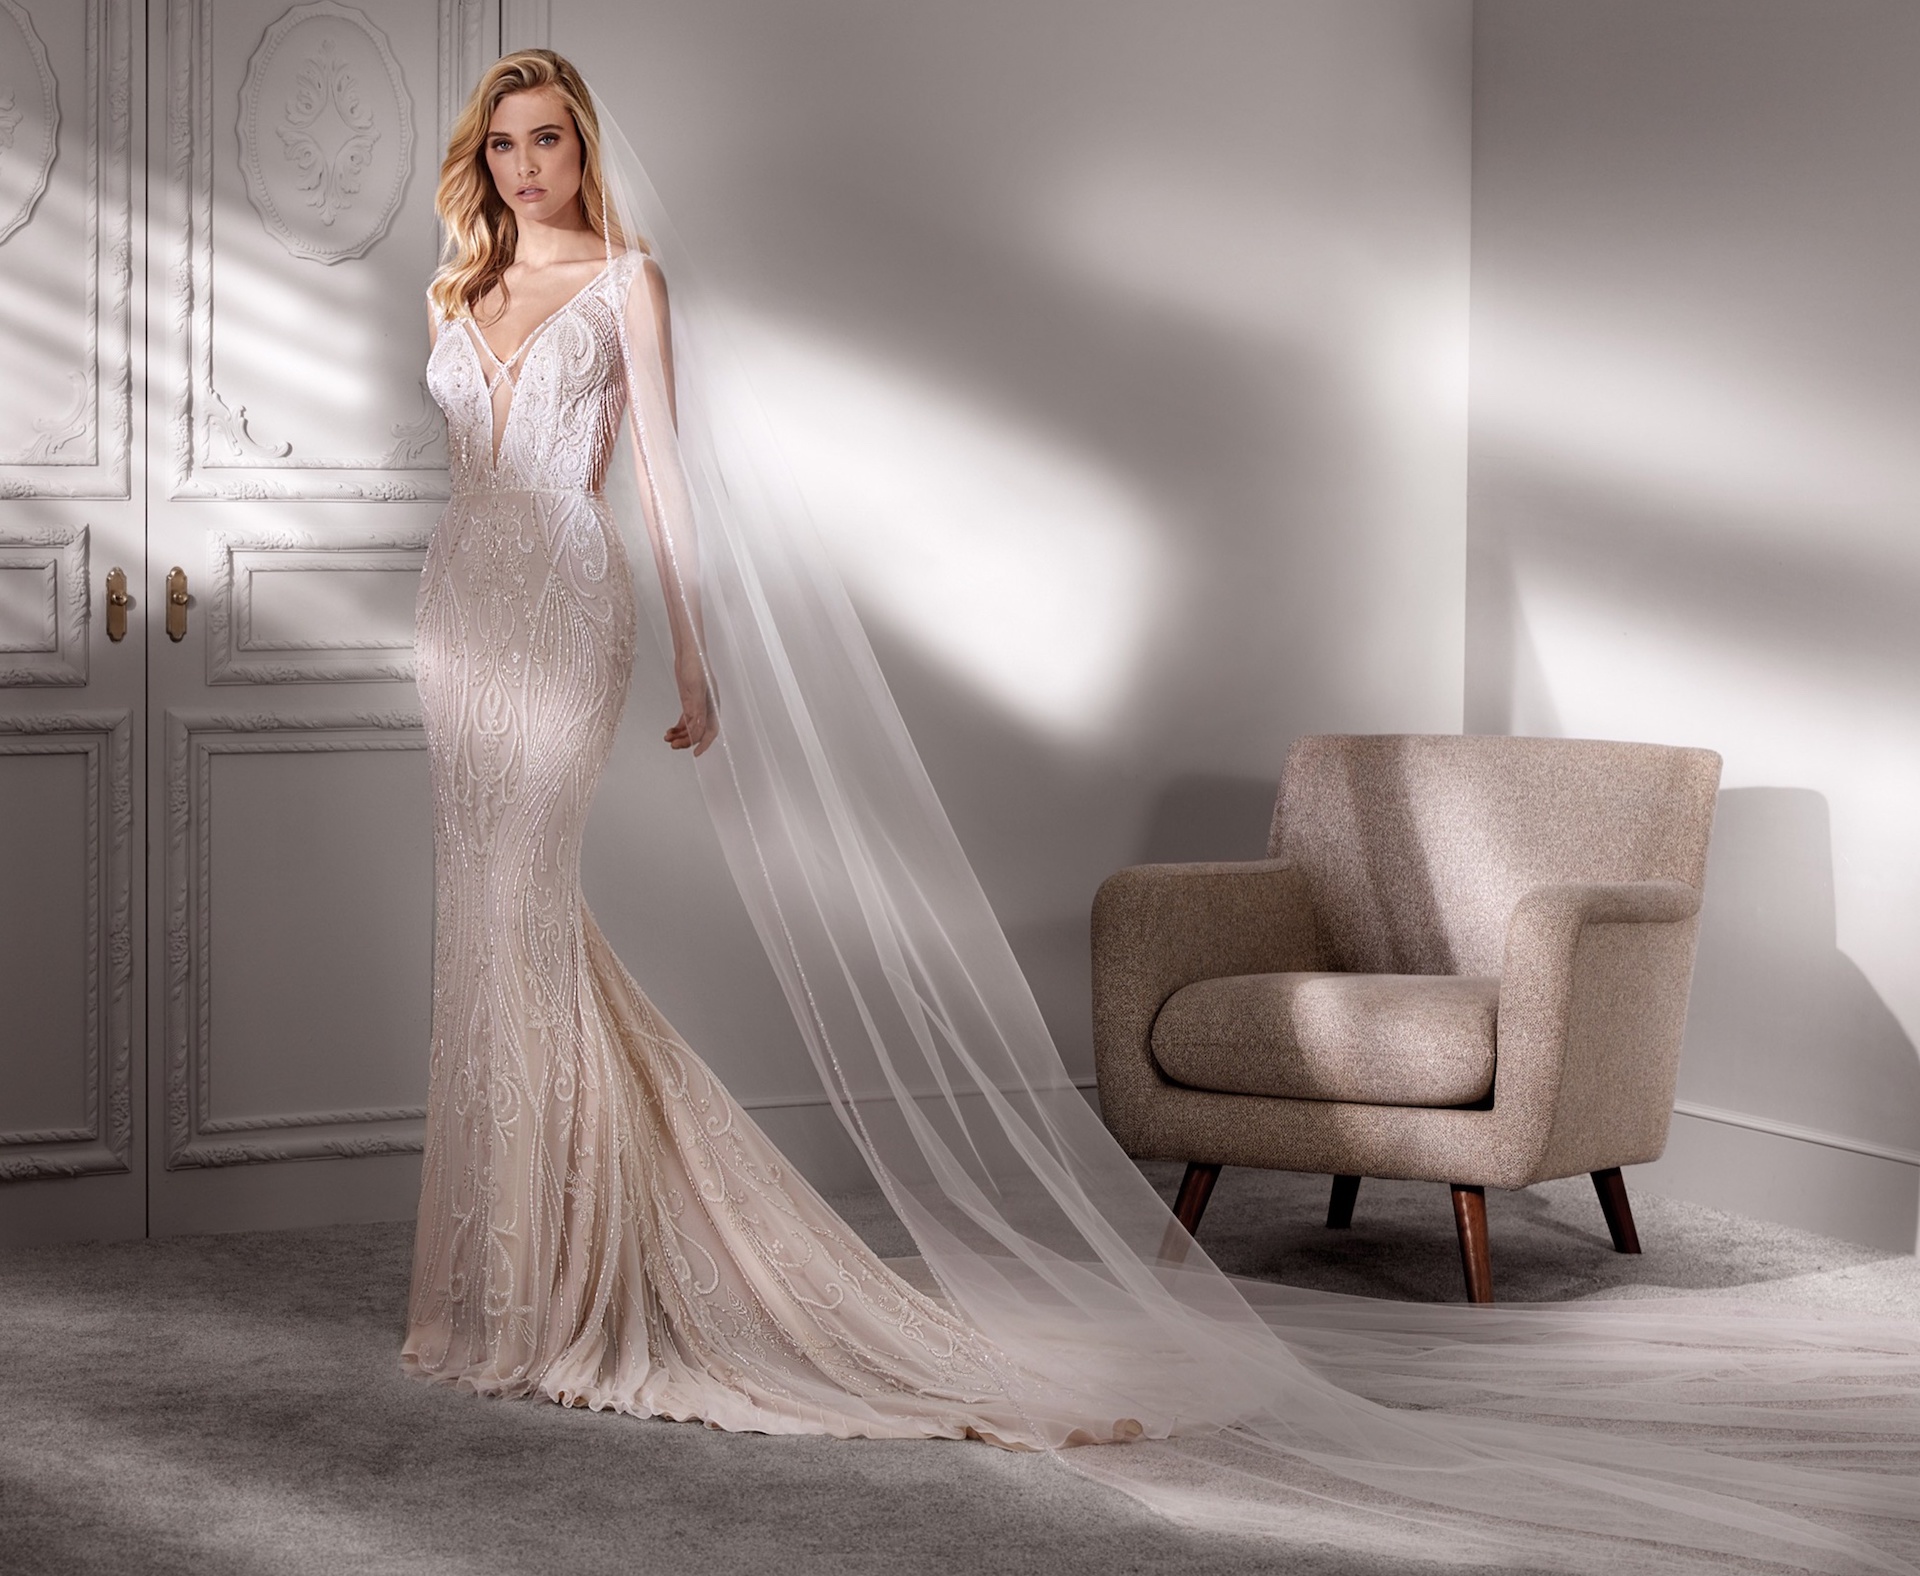 Questions to Ask When Wedding Dress Shopping